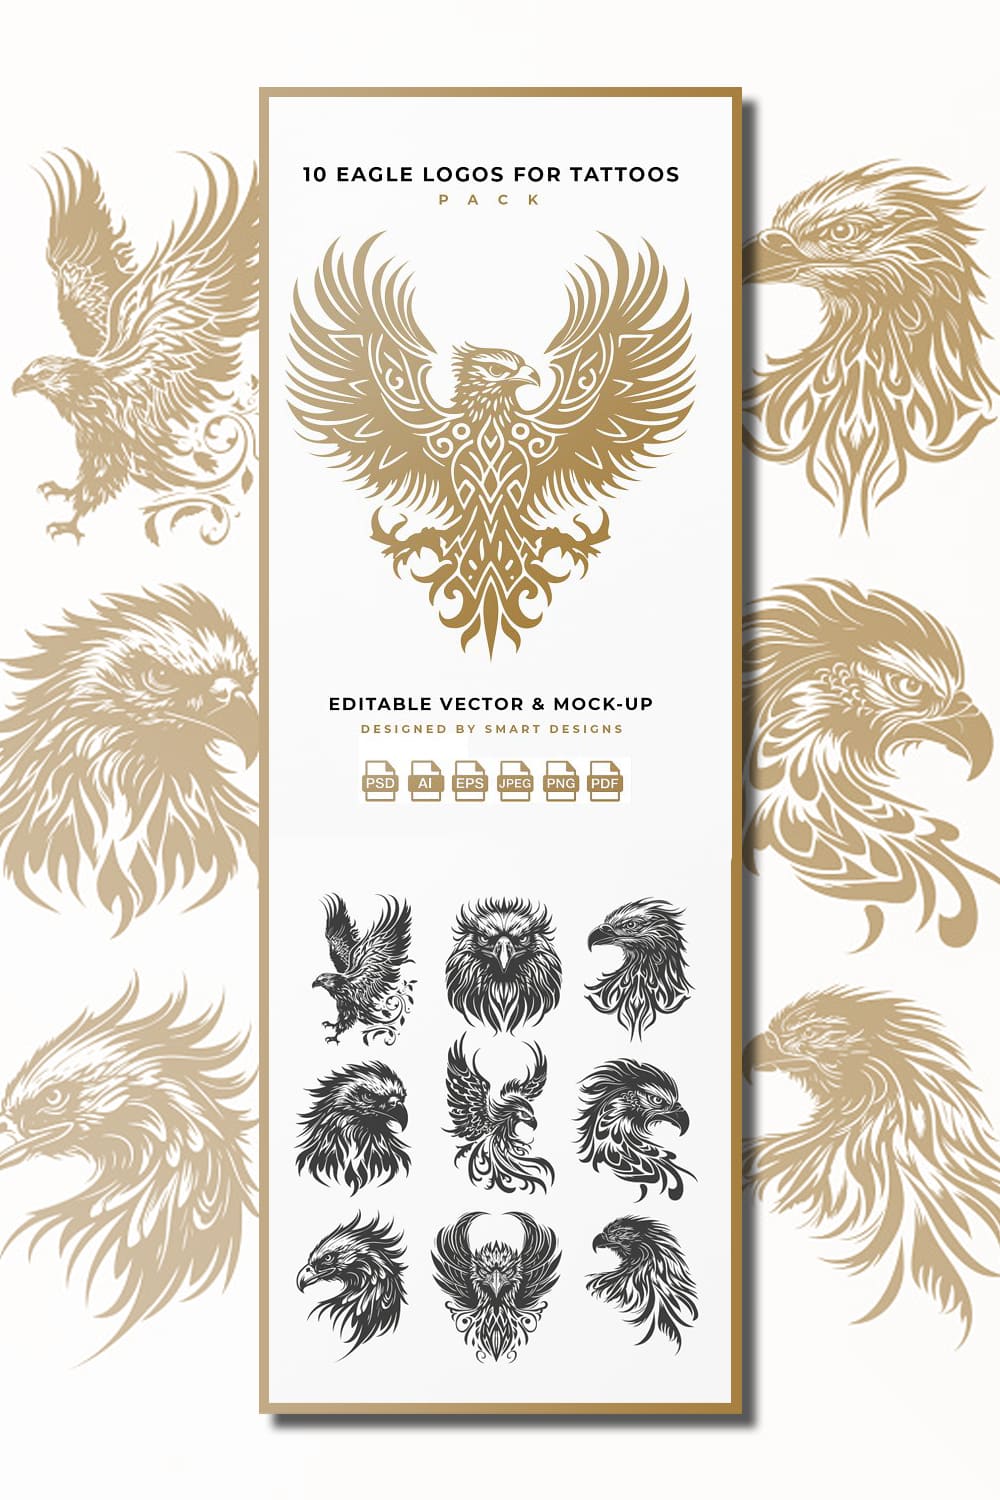 10 eagle logos for tattoos pack.